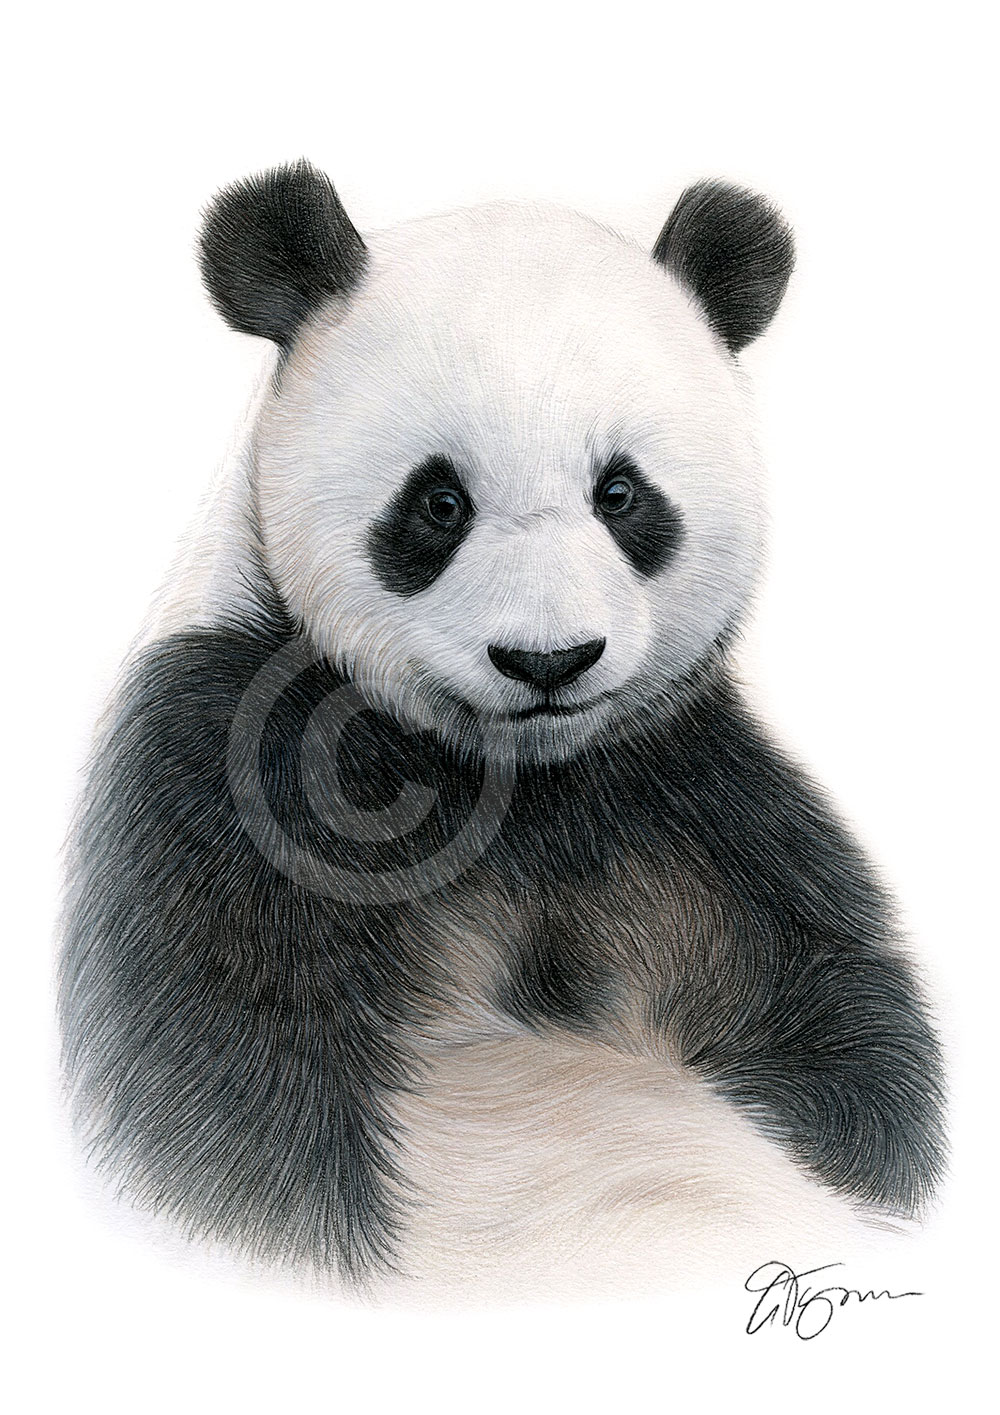 Colour pencil drawing of a Giant Panda by artist Gary Tymon